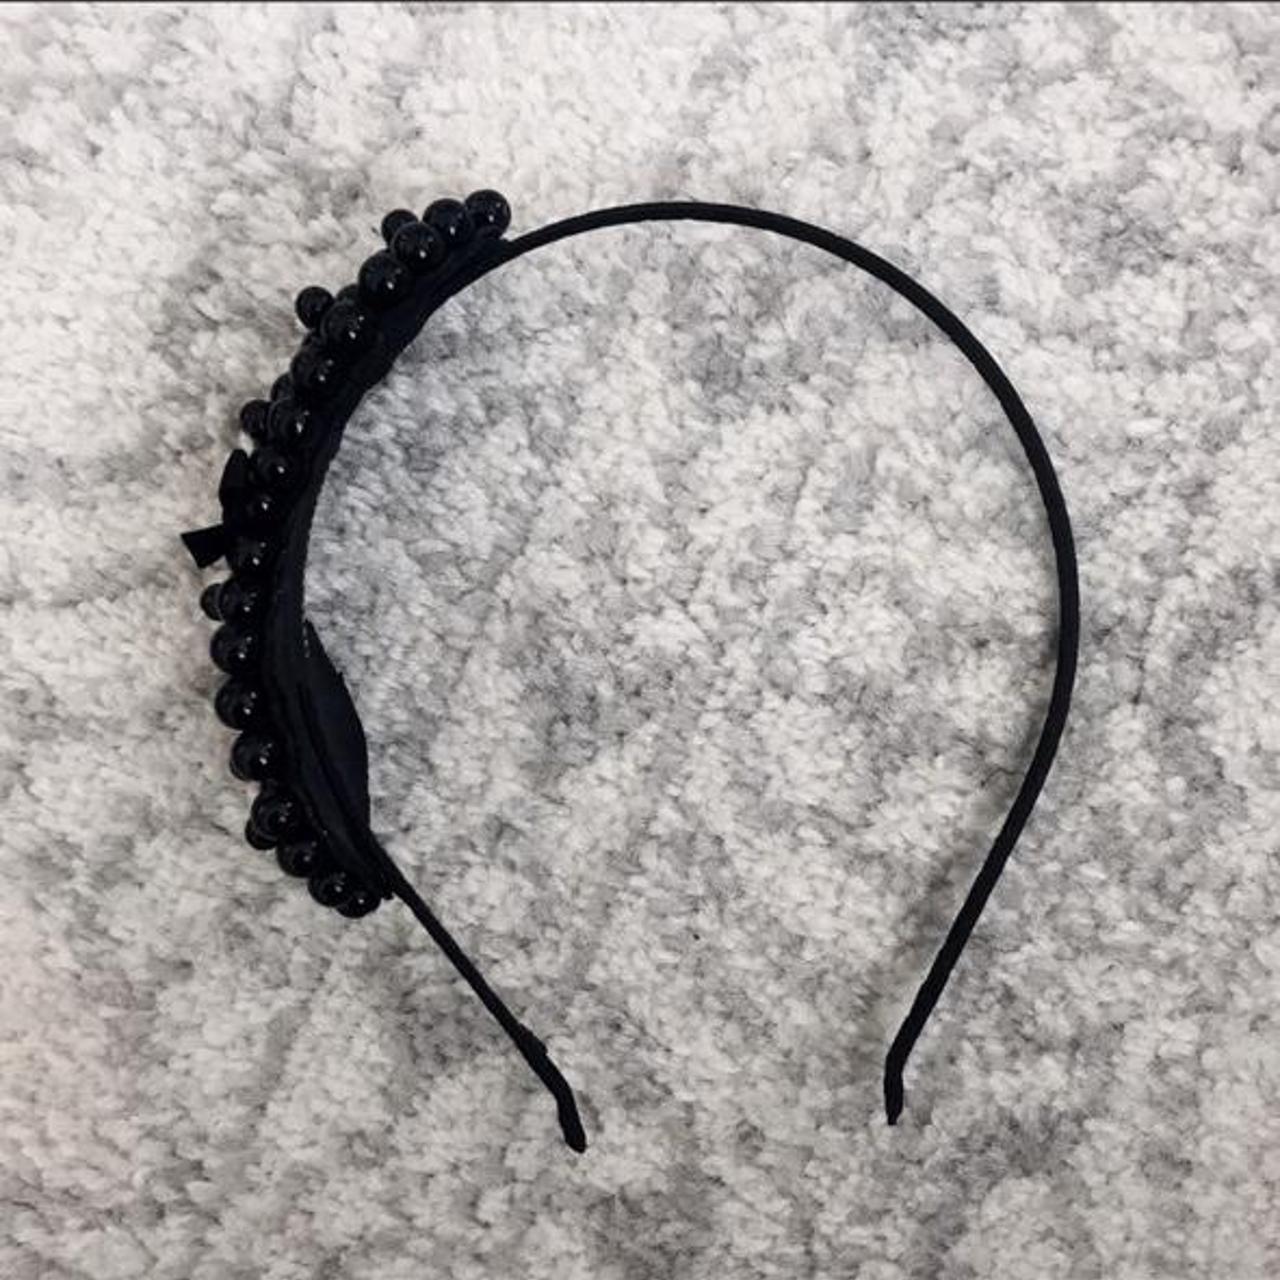 Product Image 1 - Urban outfitters headband
Worn once in